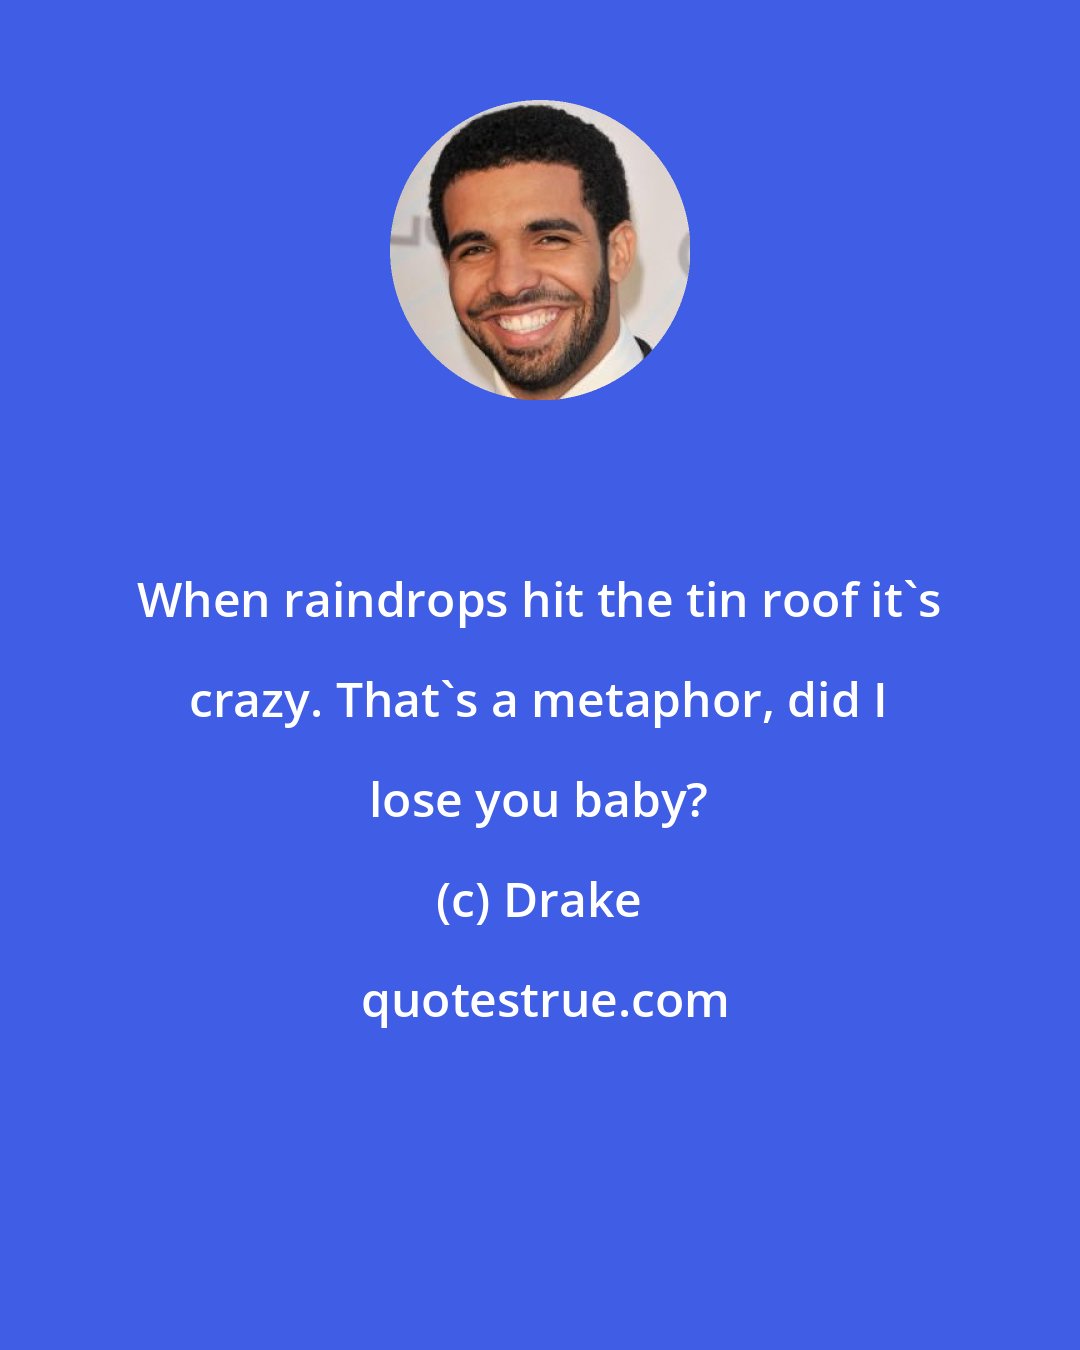 Drake: When raindrops hit the tin roof it's crazy. That's a metaphor, did I lose you baby?